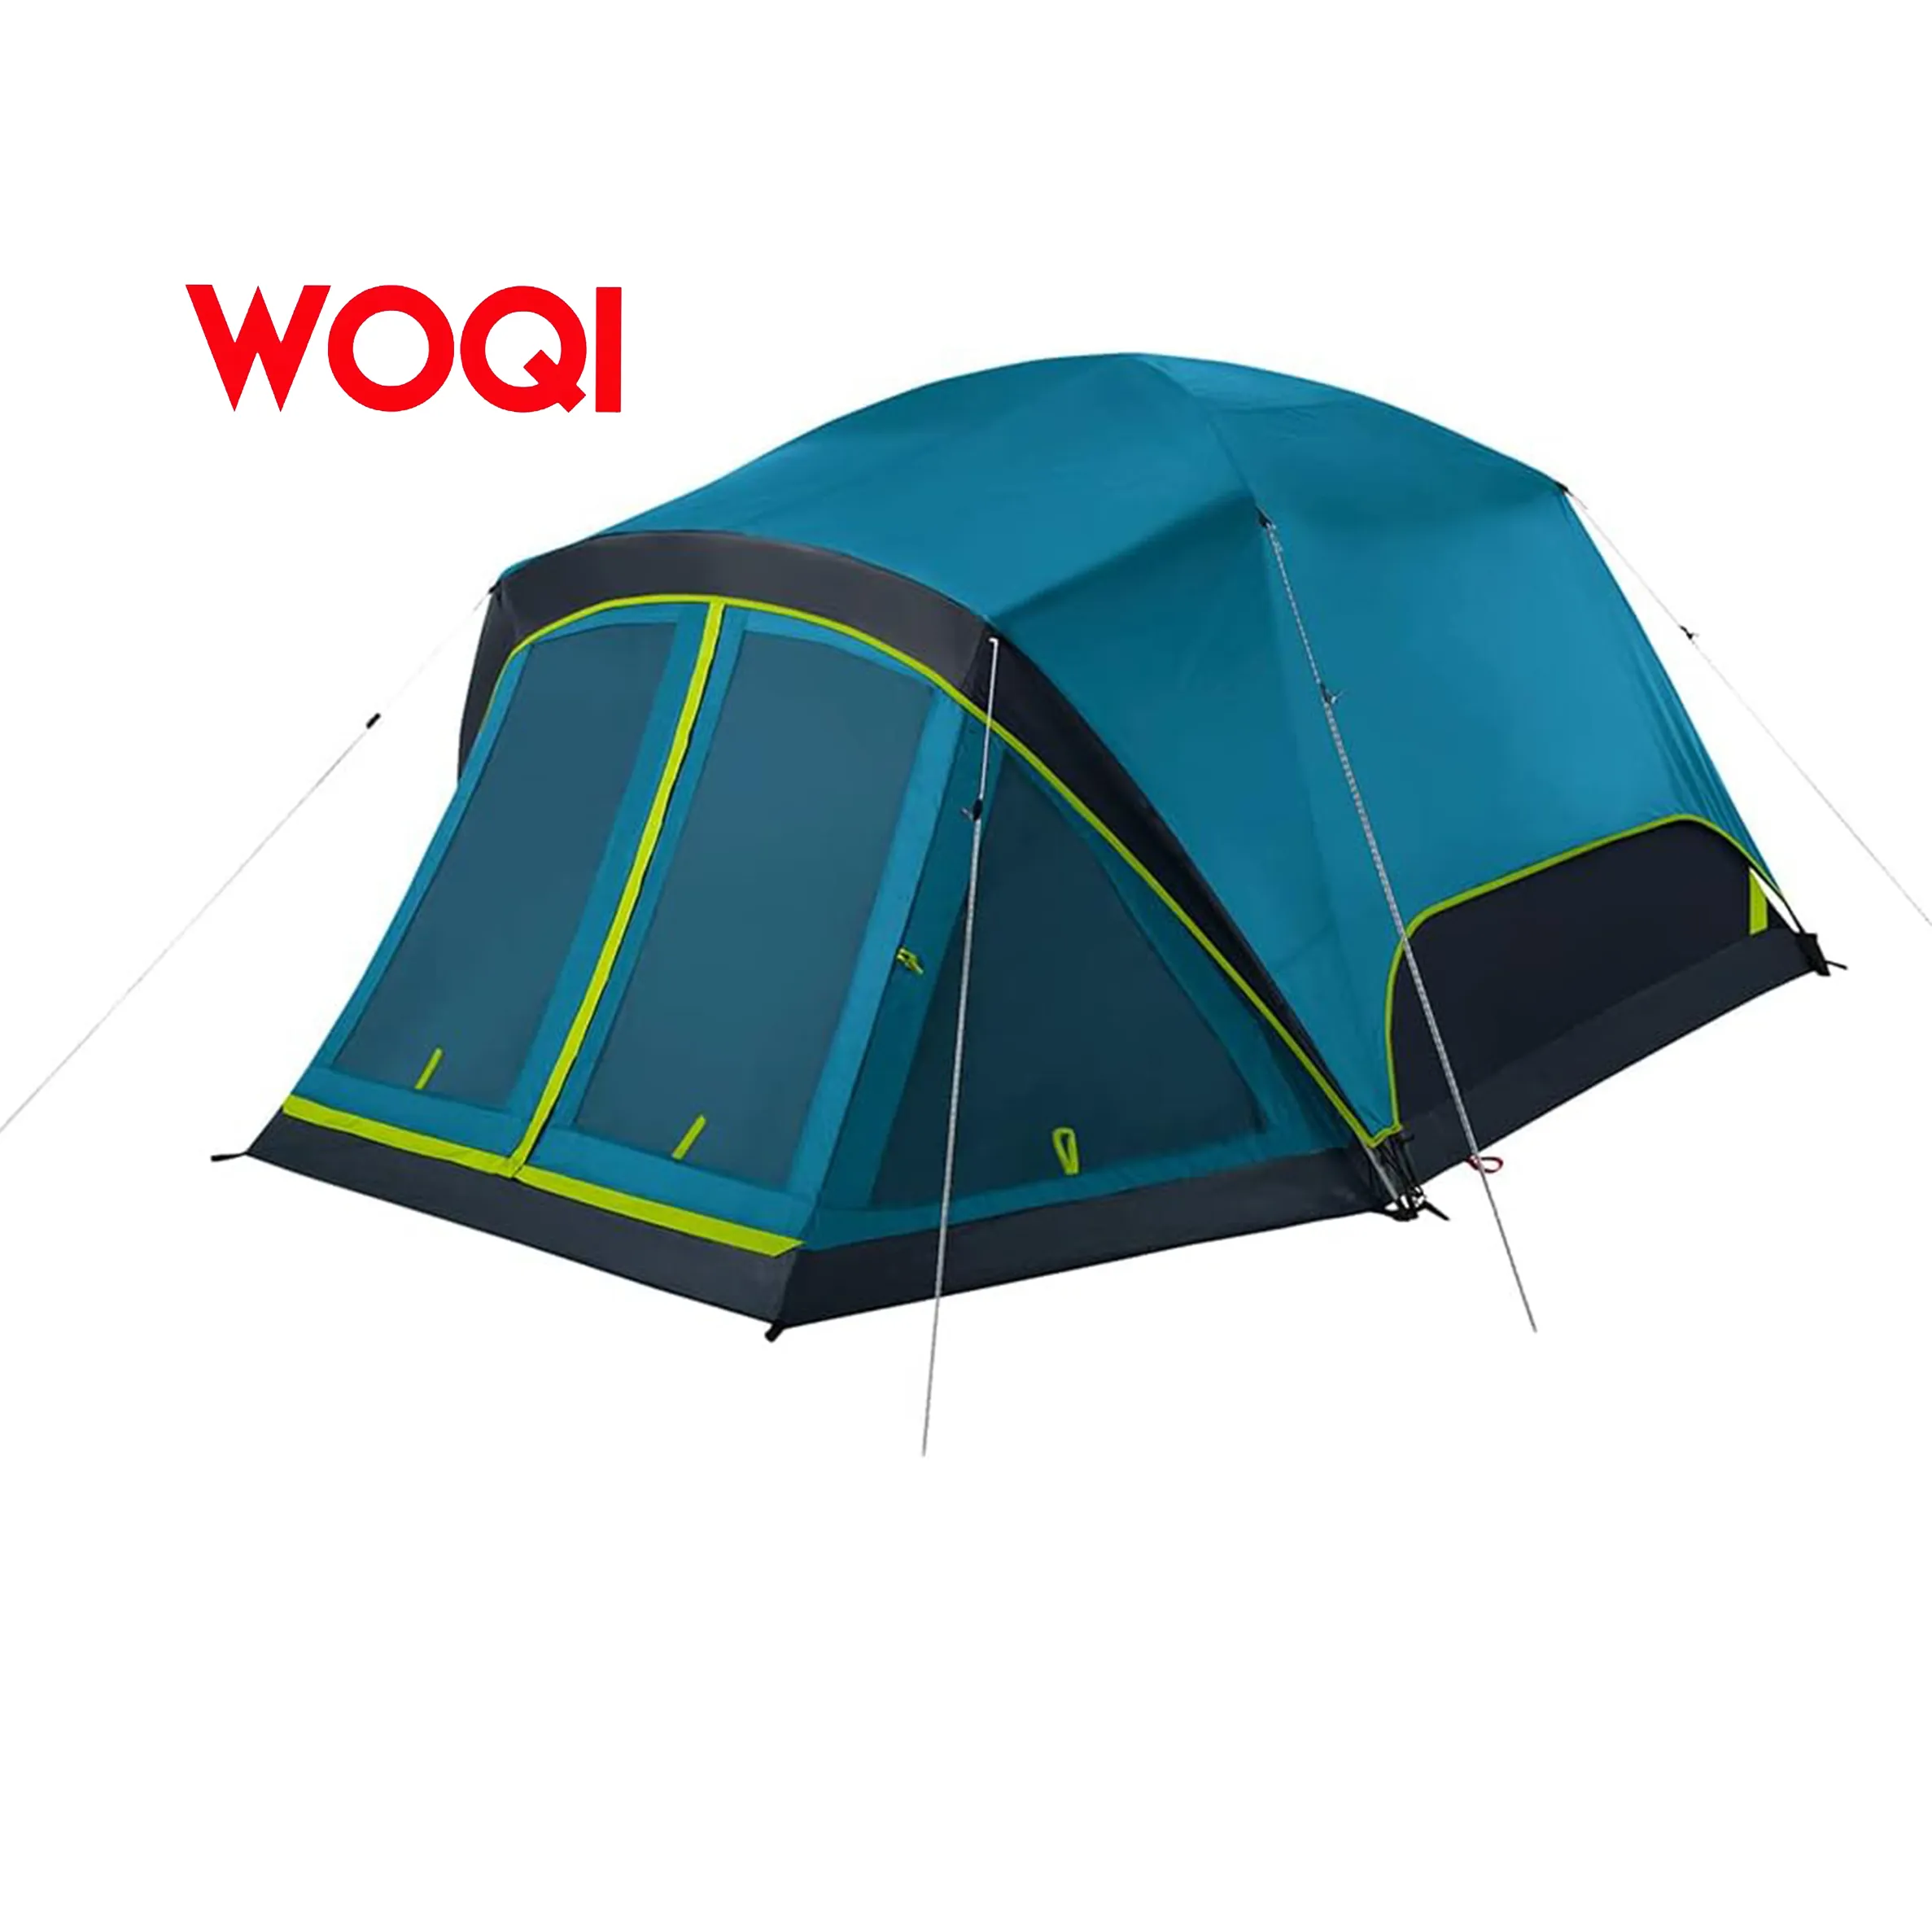 WOQI camping tent, weather proof 4/6 person tent can block 90% of sunlight